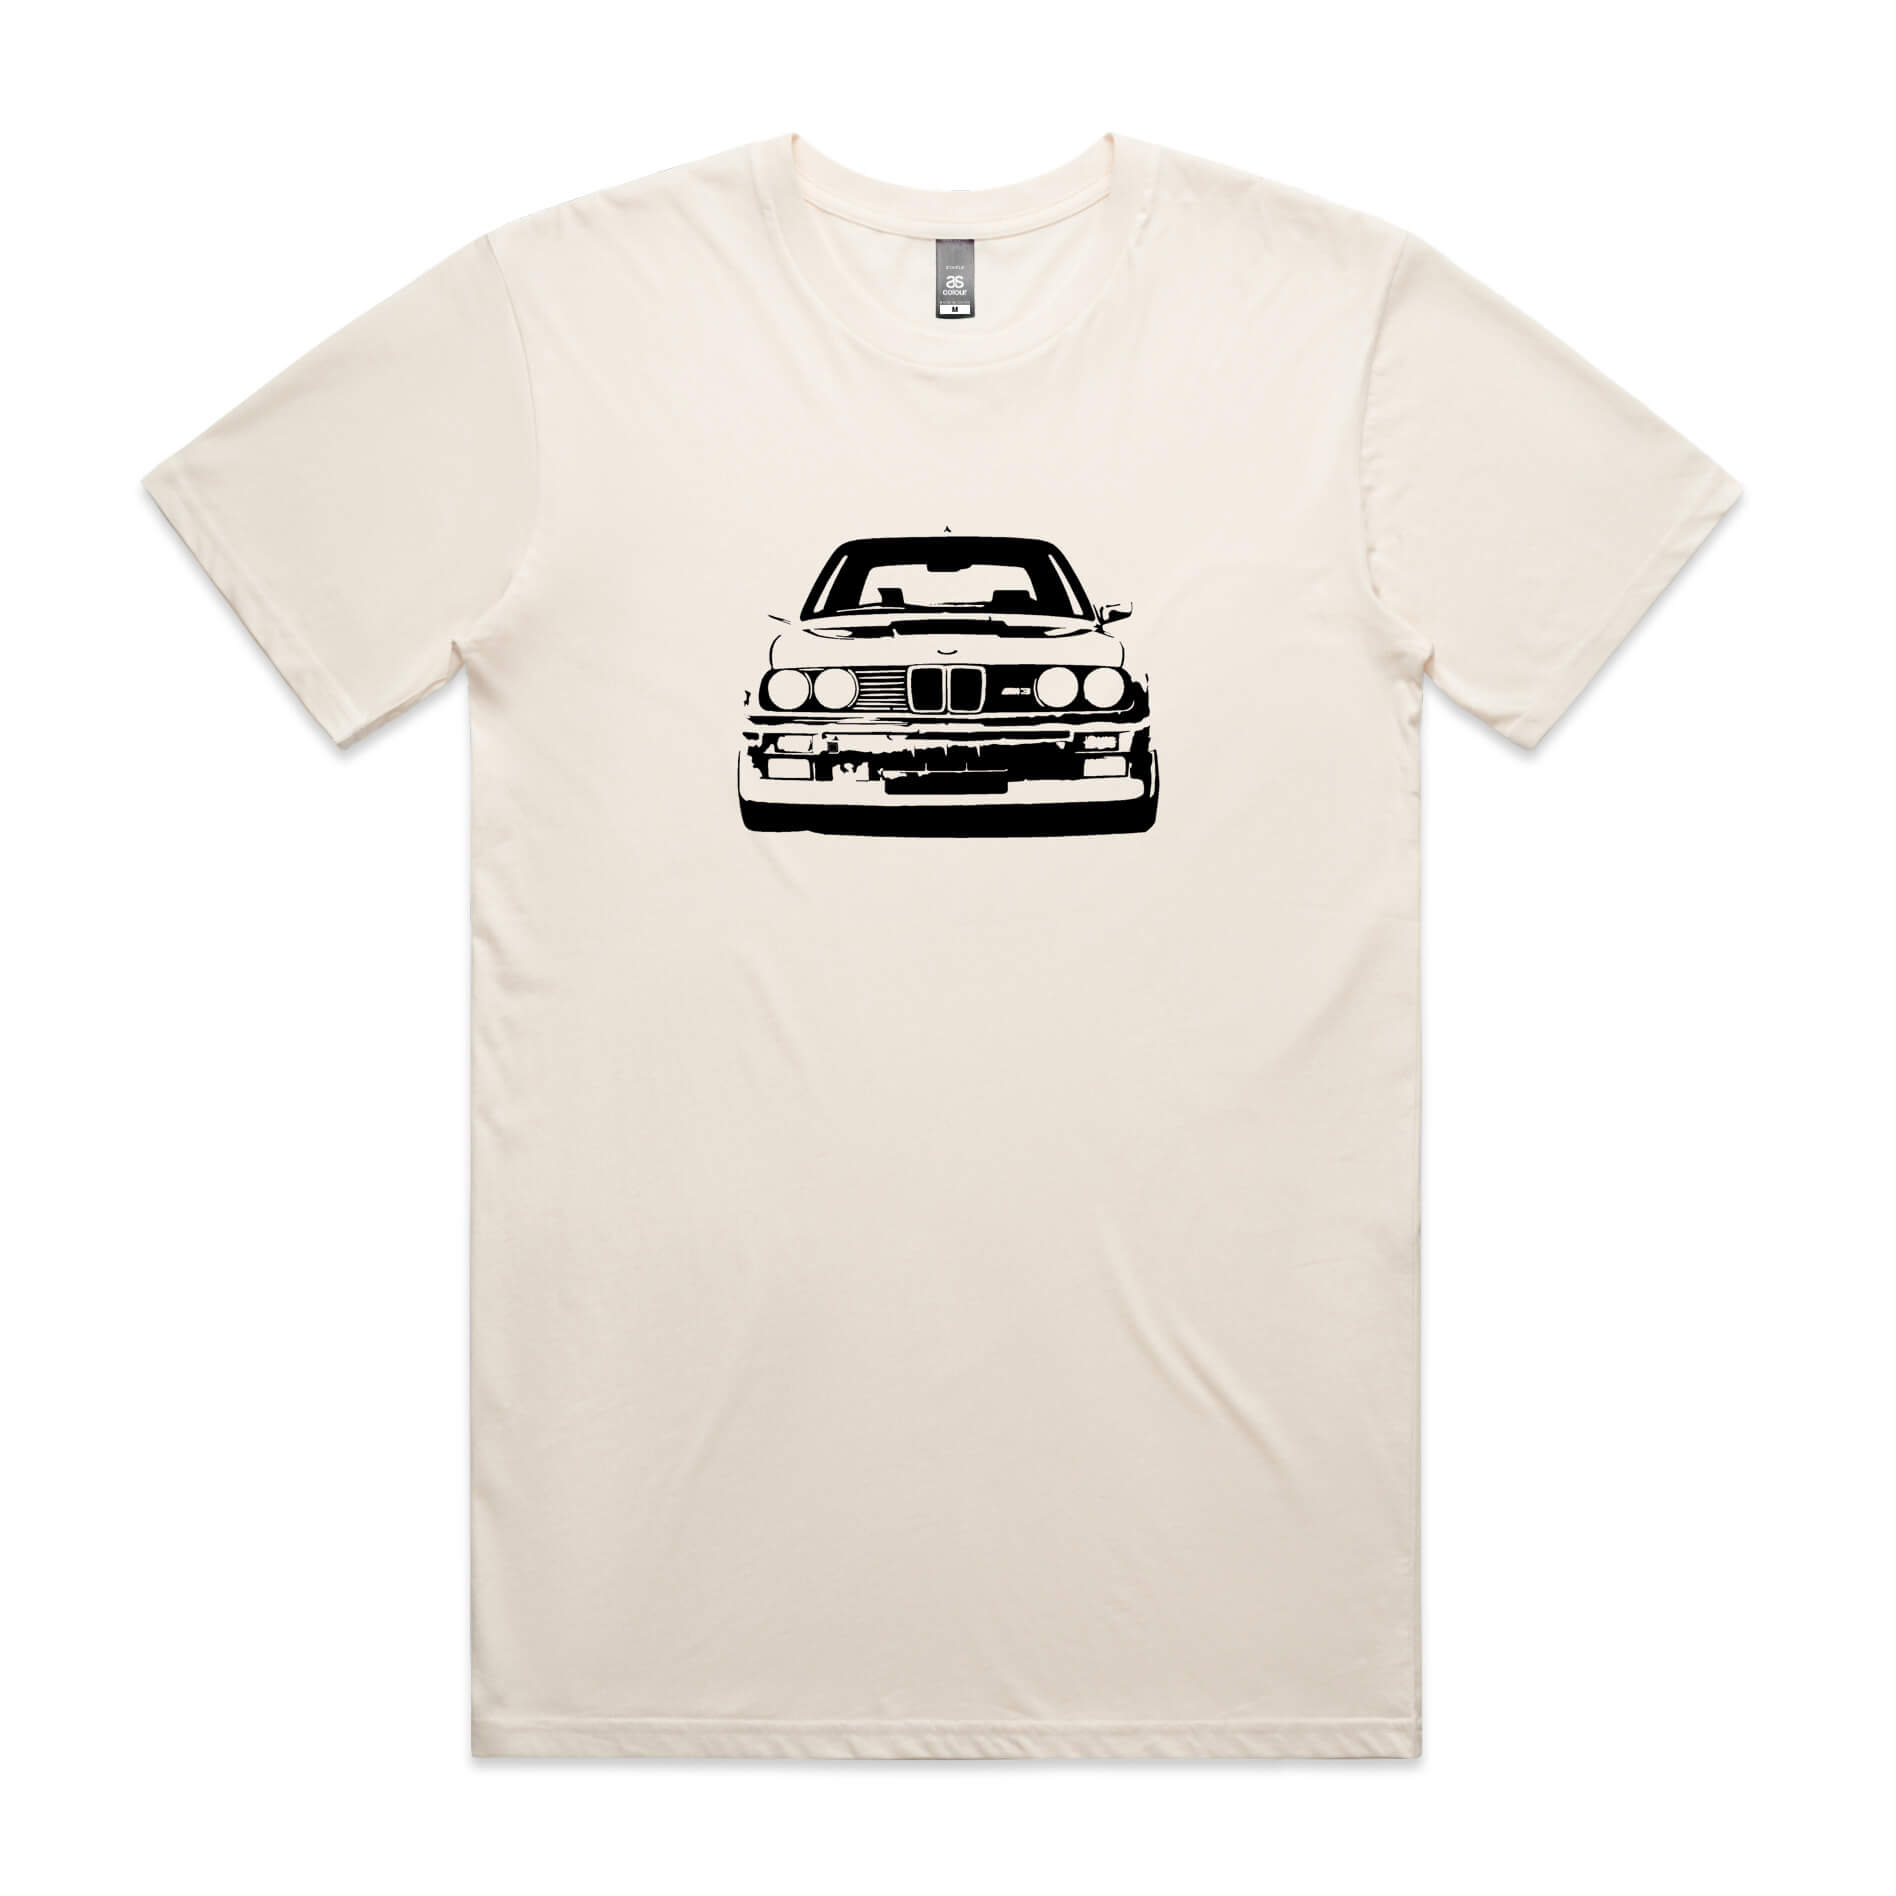 BMW E30 t-shirt with M3 car printed in black on a beige shirt